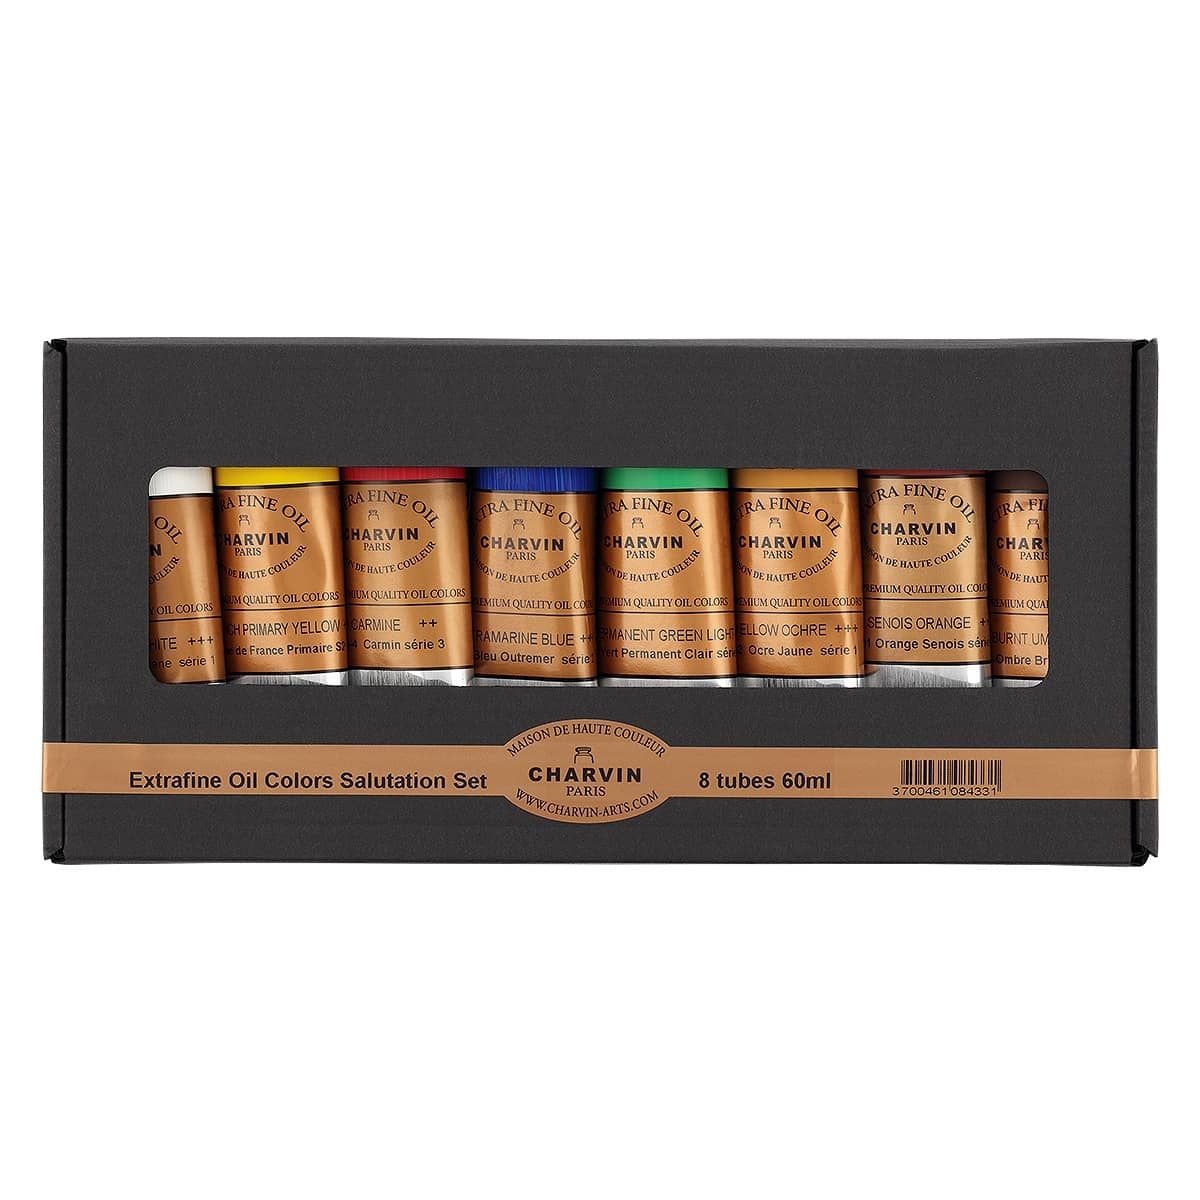 Charvin Professional Oil Paint Extra Fine Color, Salutation Set of 8 60ml  Tubes - Assorted Colors